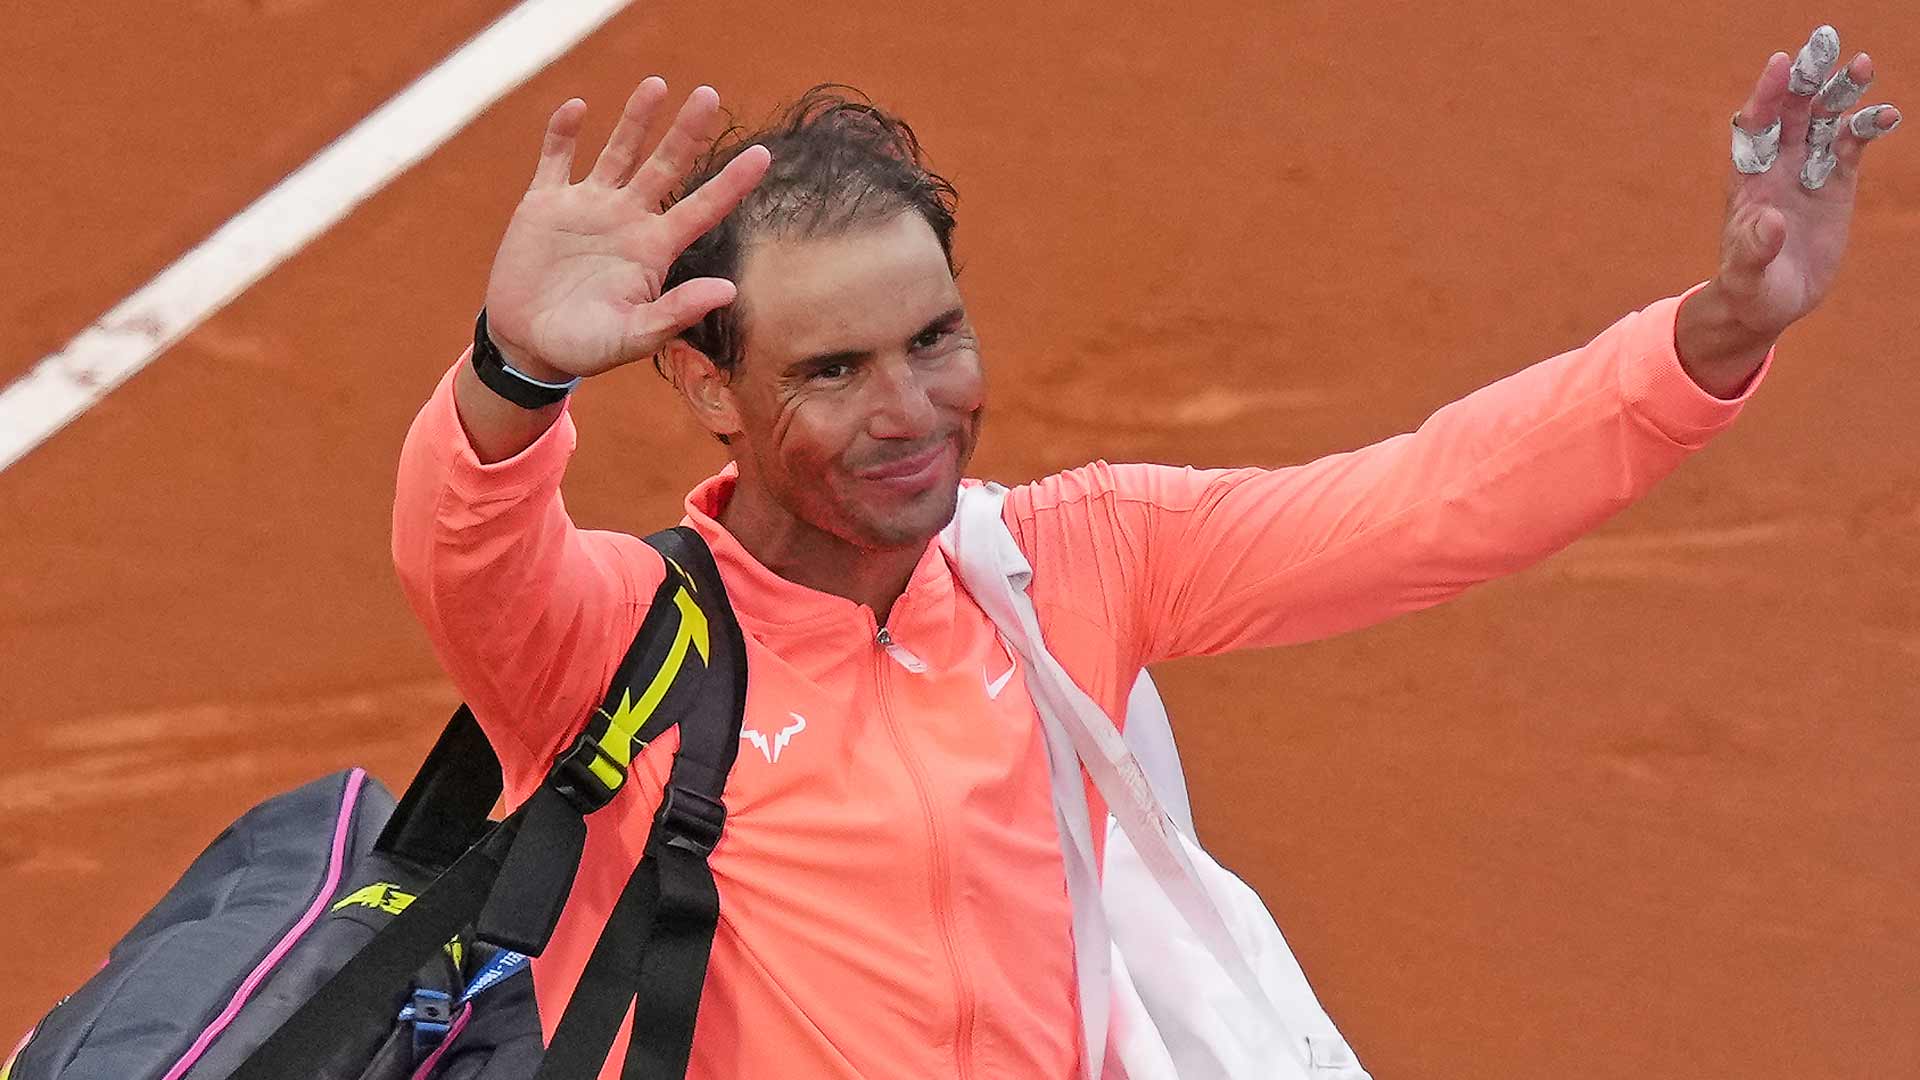 Rafael Nadal waves to the crowd after his second-round defeat to Alex de Minaur on Wednesday in Barcelona.